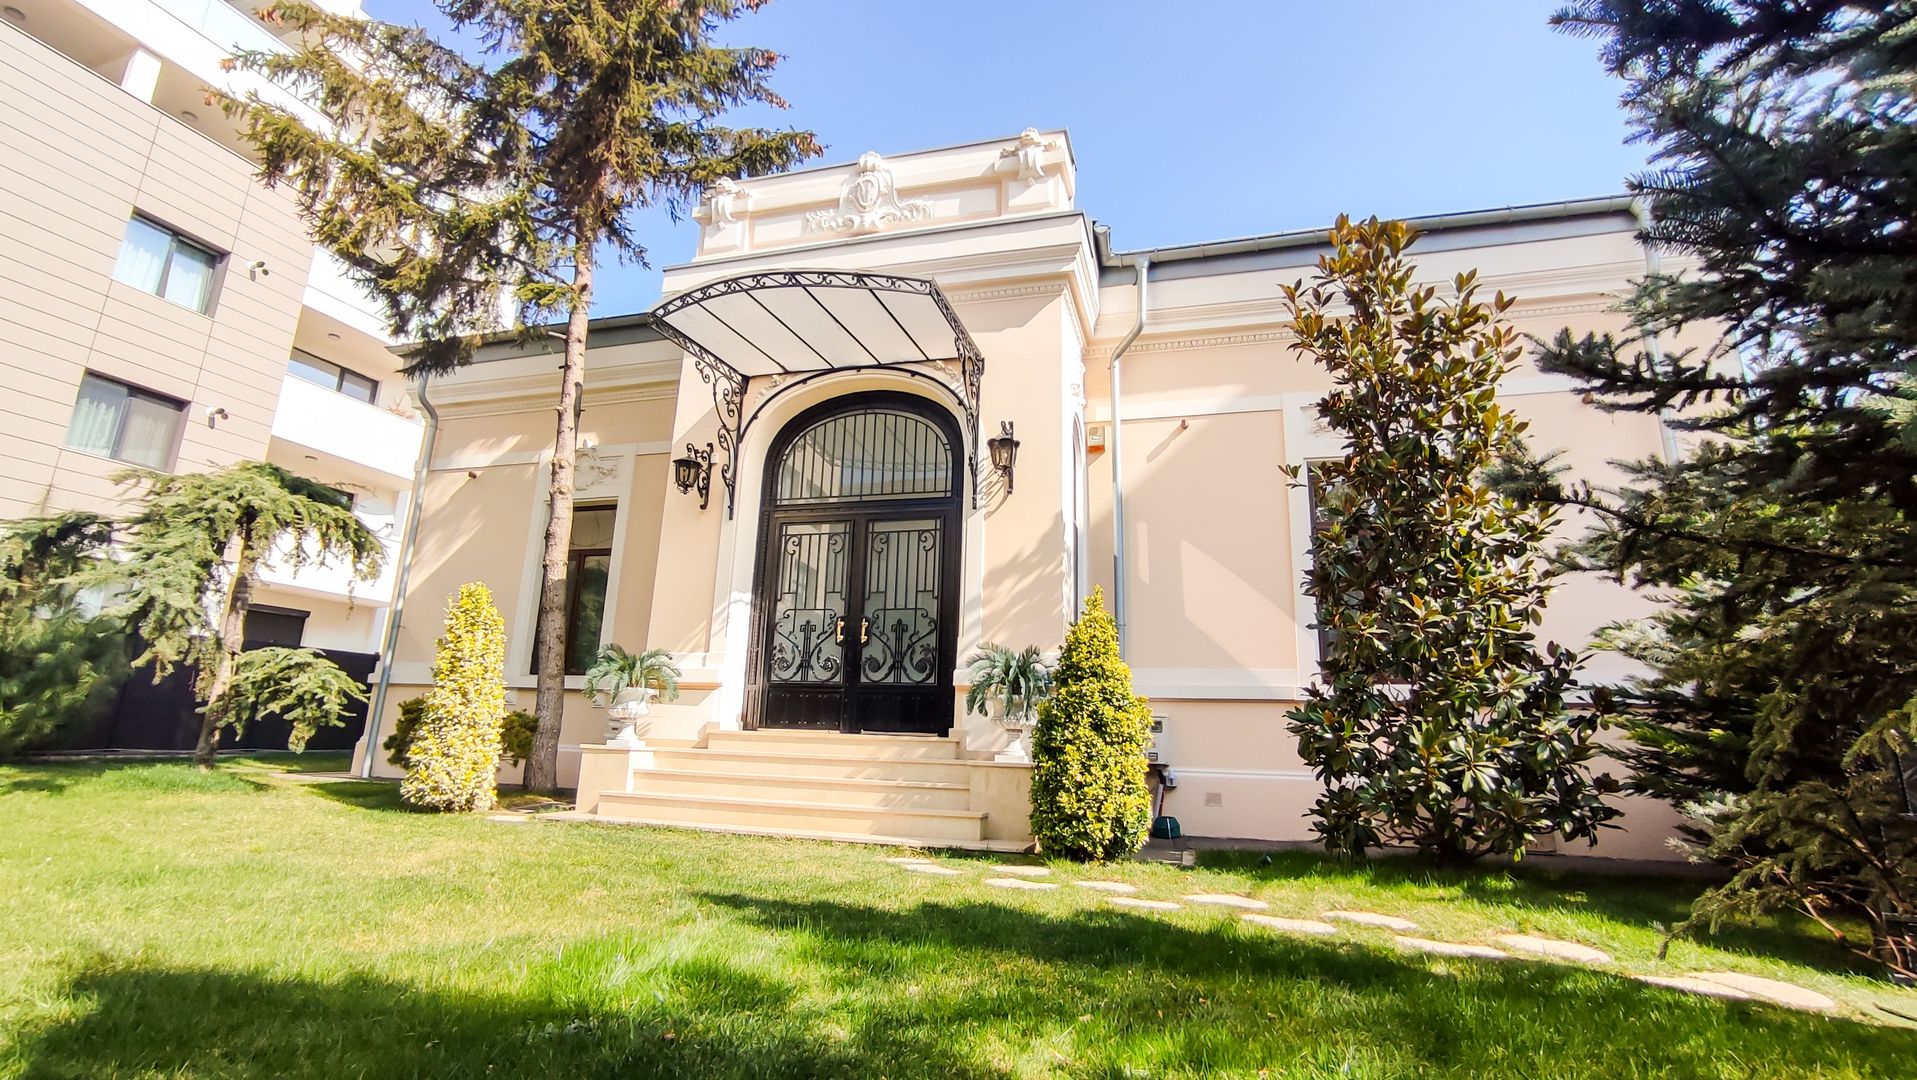 The superb reconsolidated and renovated house in the Piata Unirii area